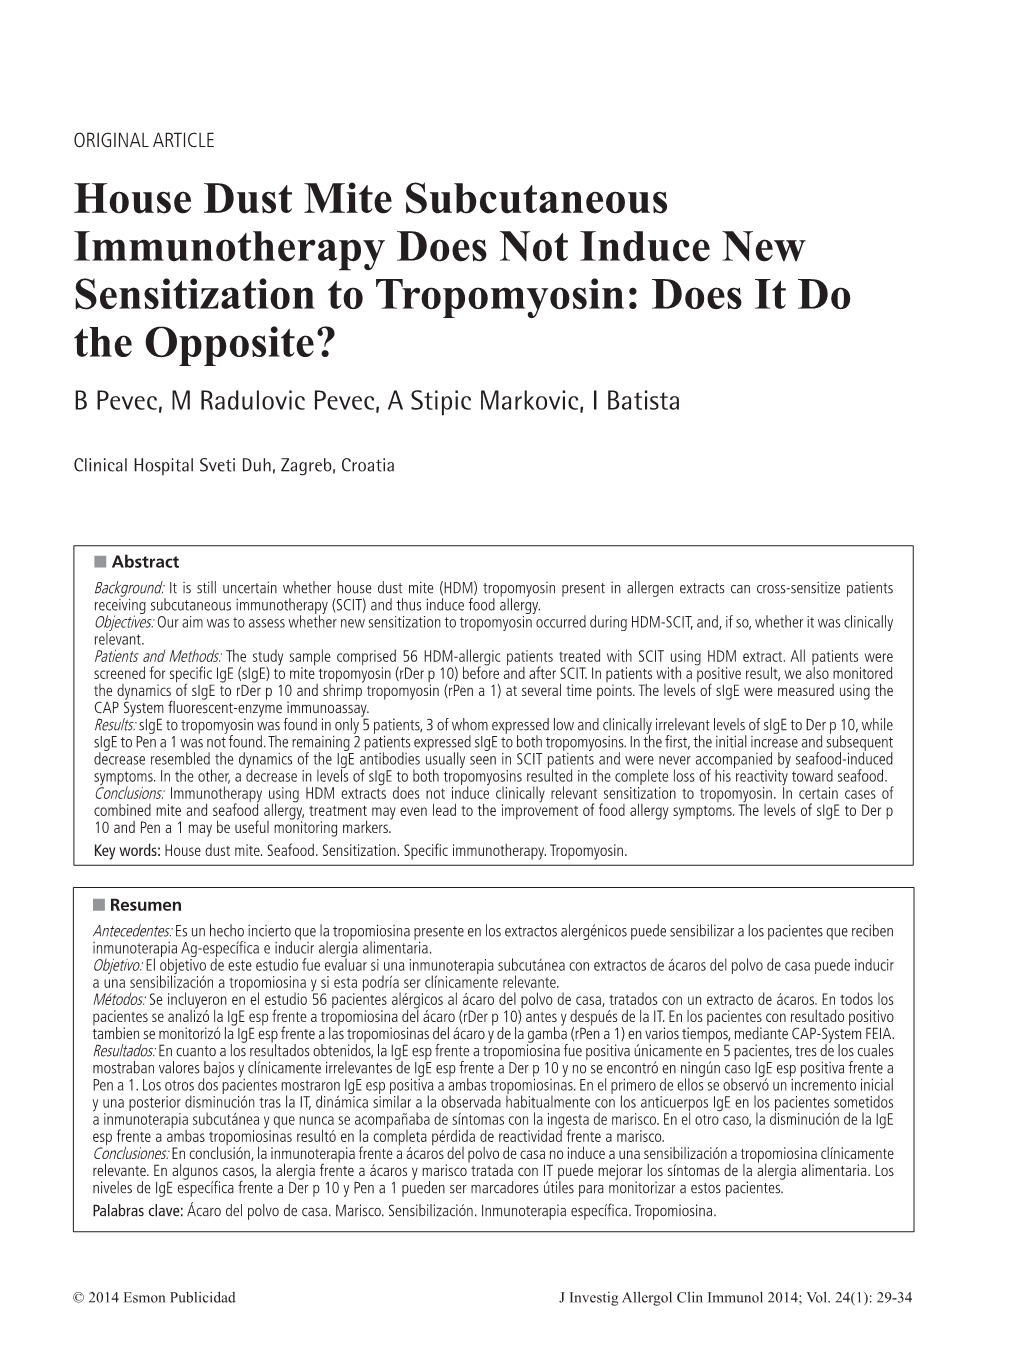 House Dust Mite Subcutaneous Immunotherapy Does Not Induce New Sensitization to Tropomyosin